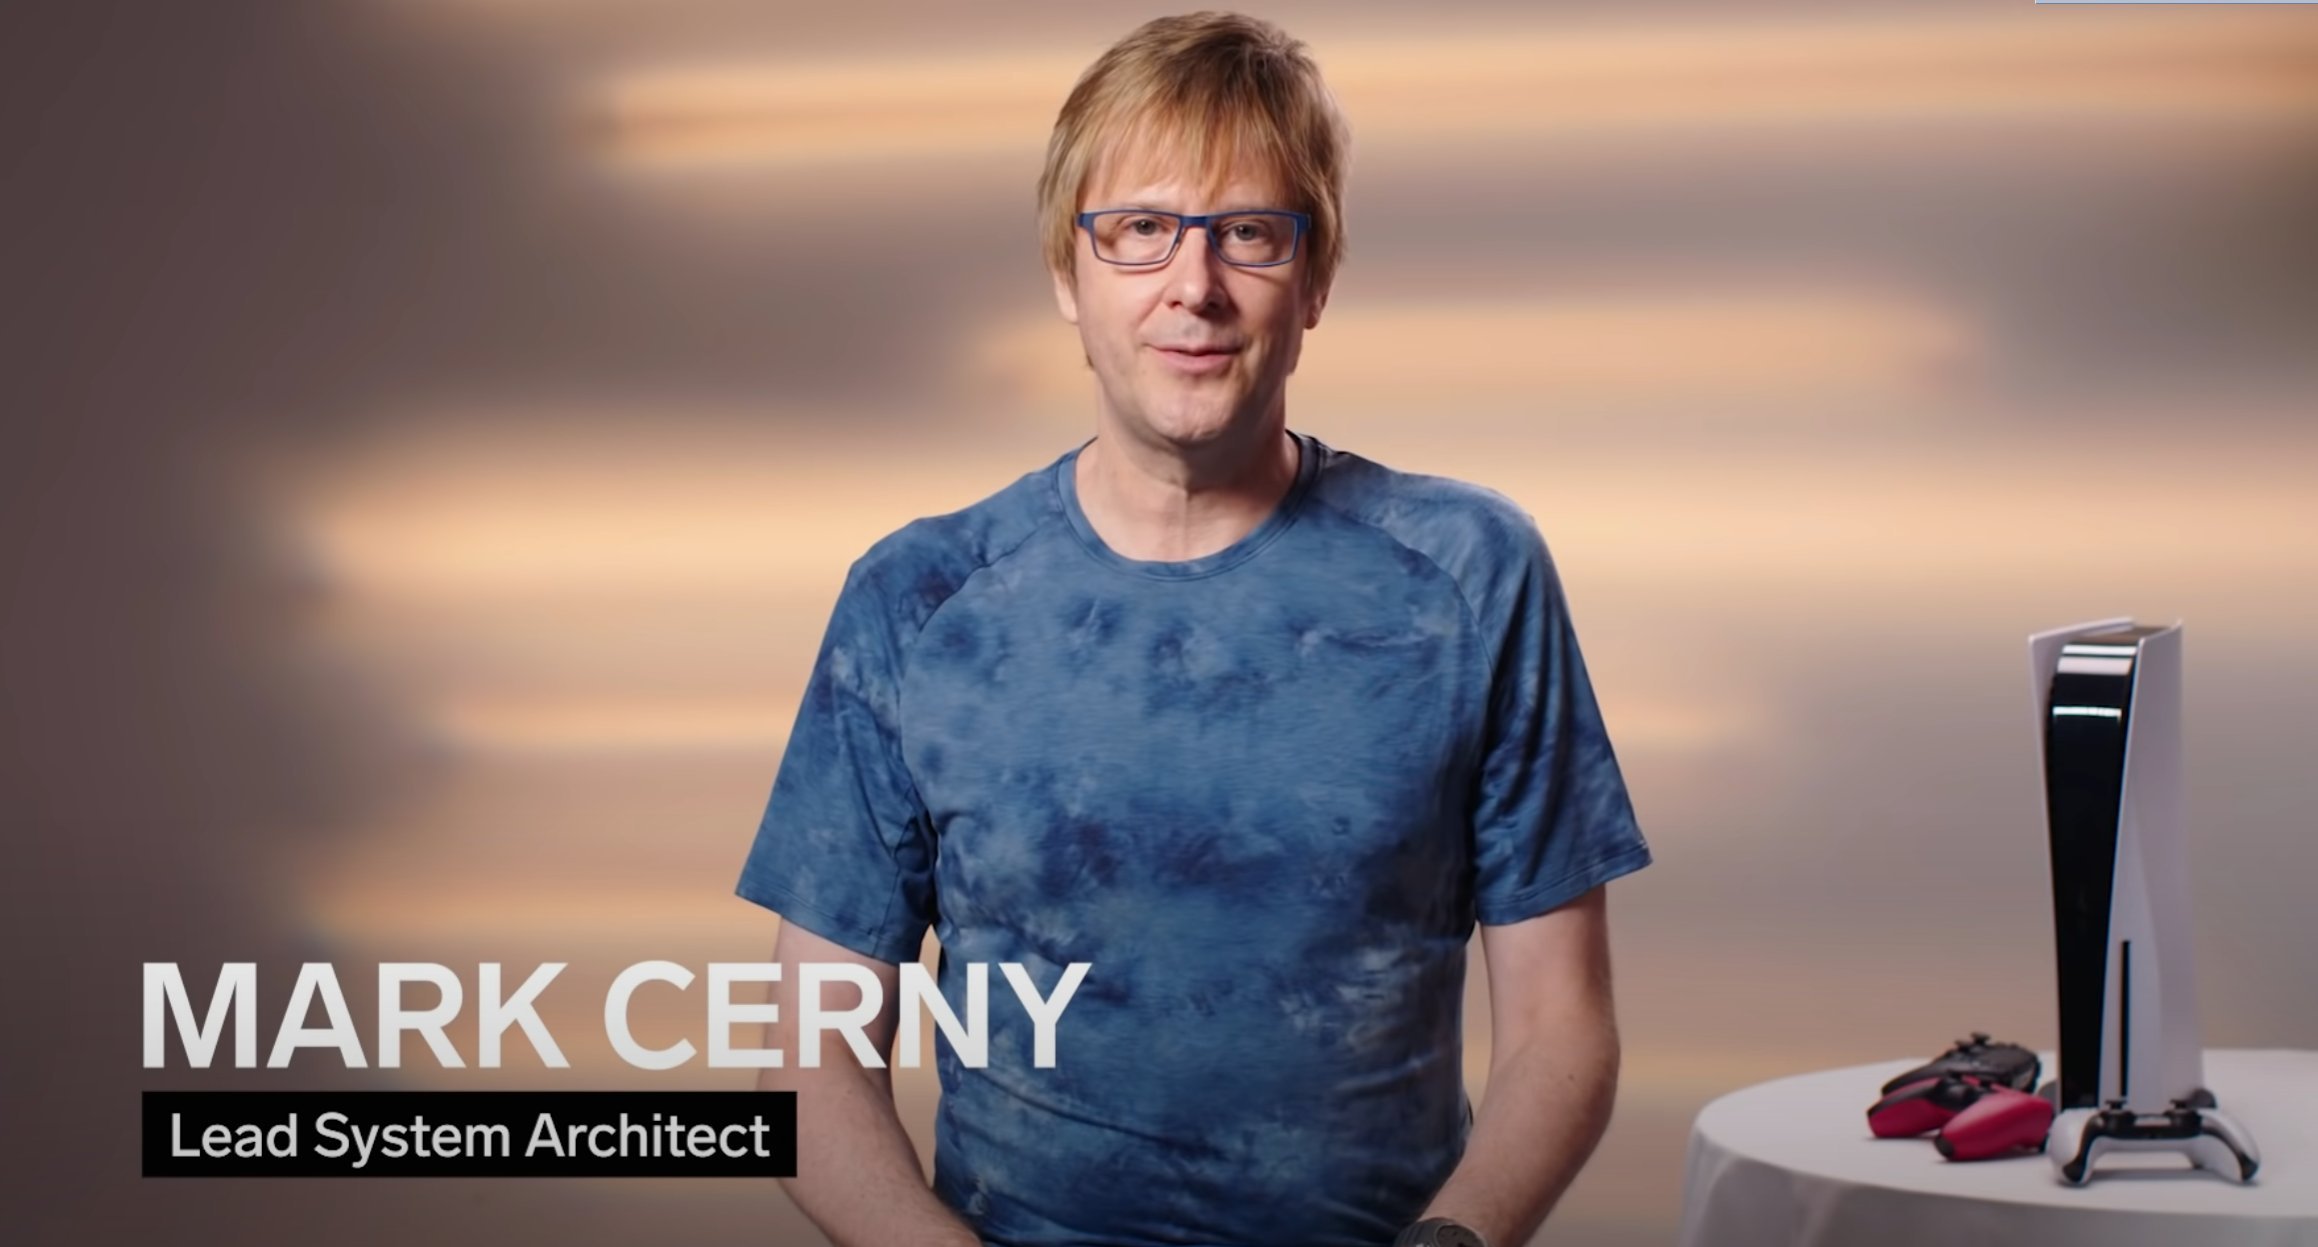 PS5 Architect Mark Cerny Discusses Console Innovation and Industry Impact